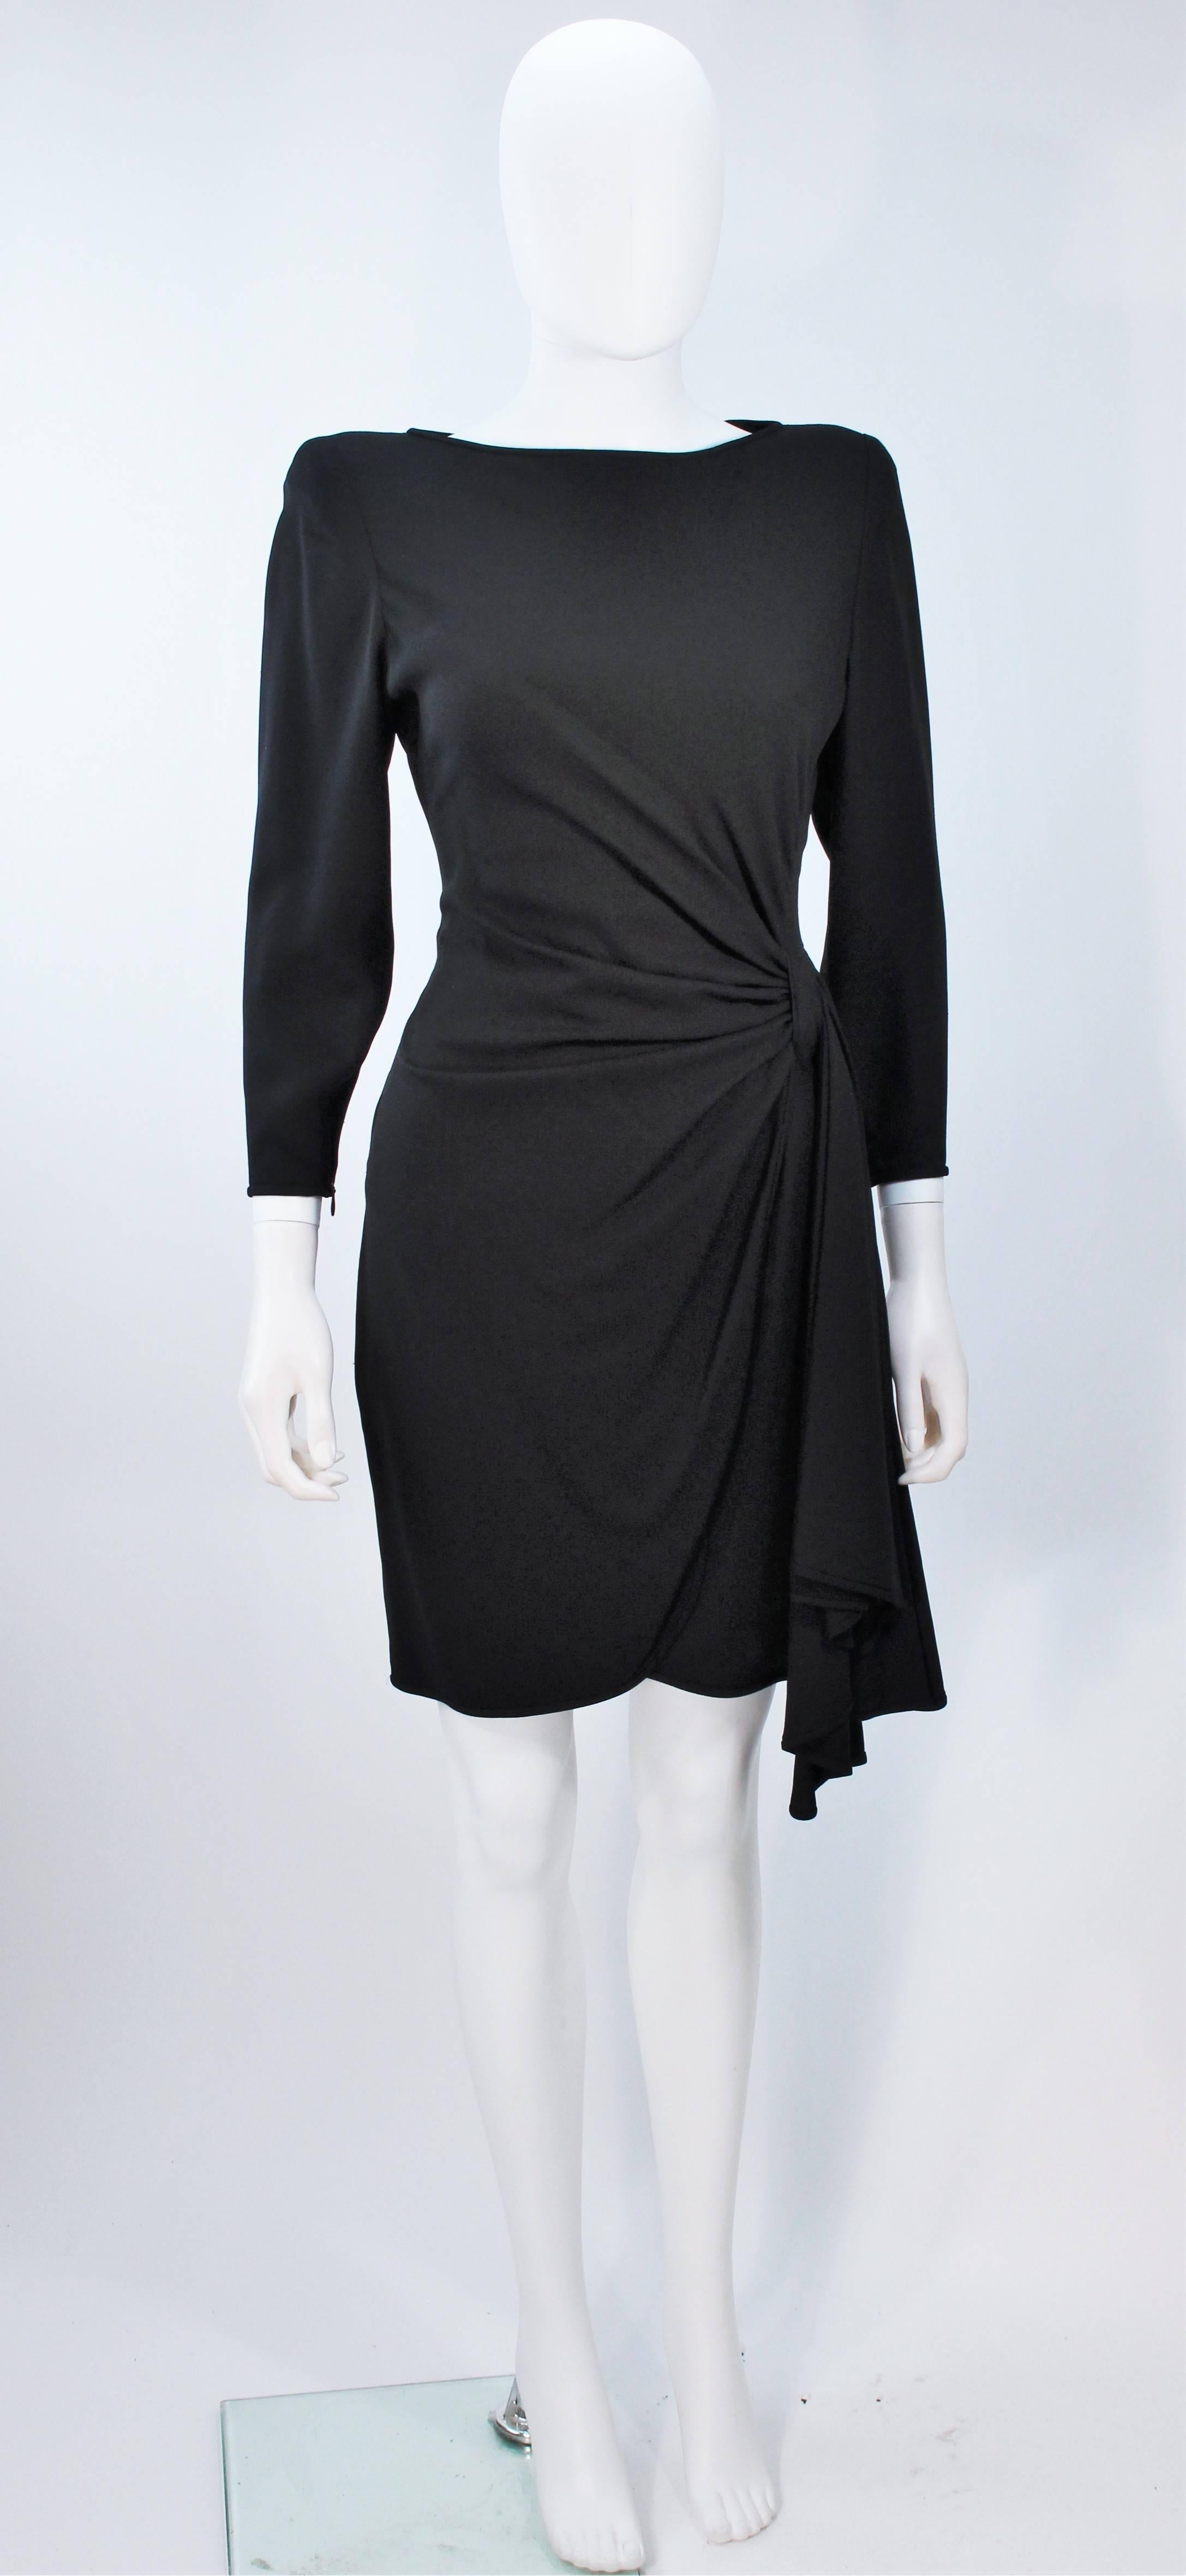  This Valentino dress is composed of a draped black fabric. There is a center back zipper closure. Wonderful design. In excellent vintage condition. 

  **Please cross-reference measurements for personal accuracy. Size in description box is an